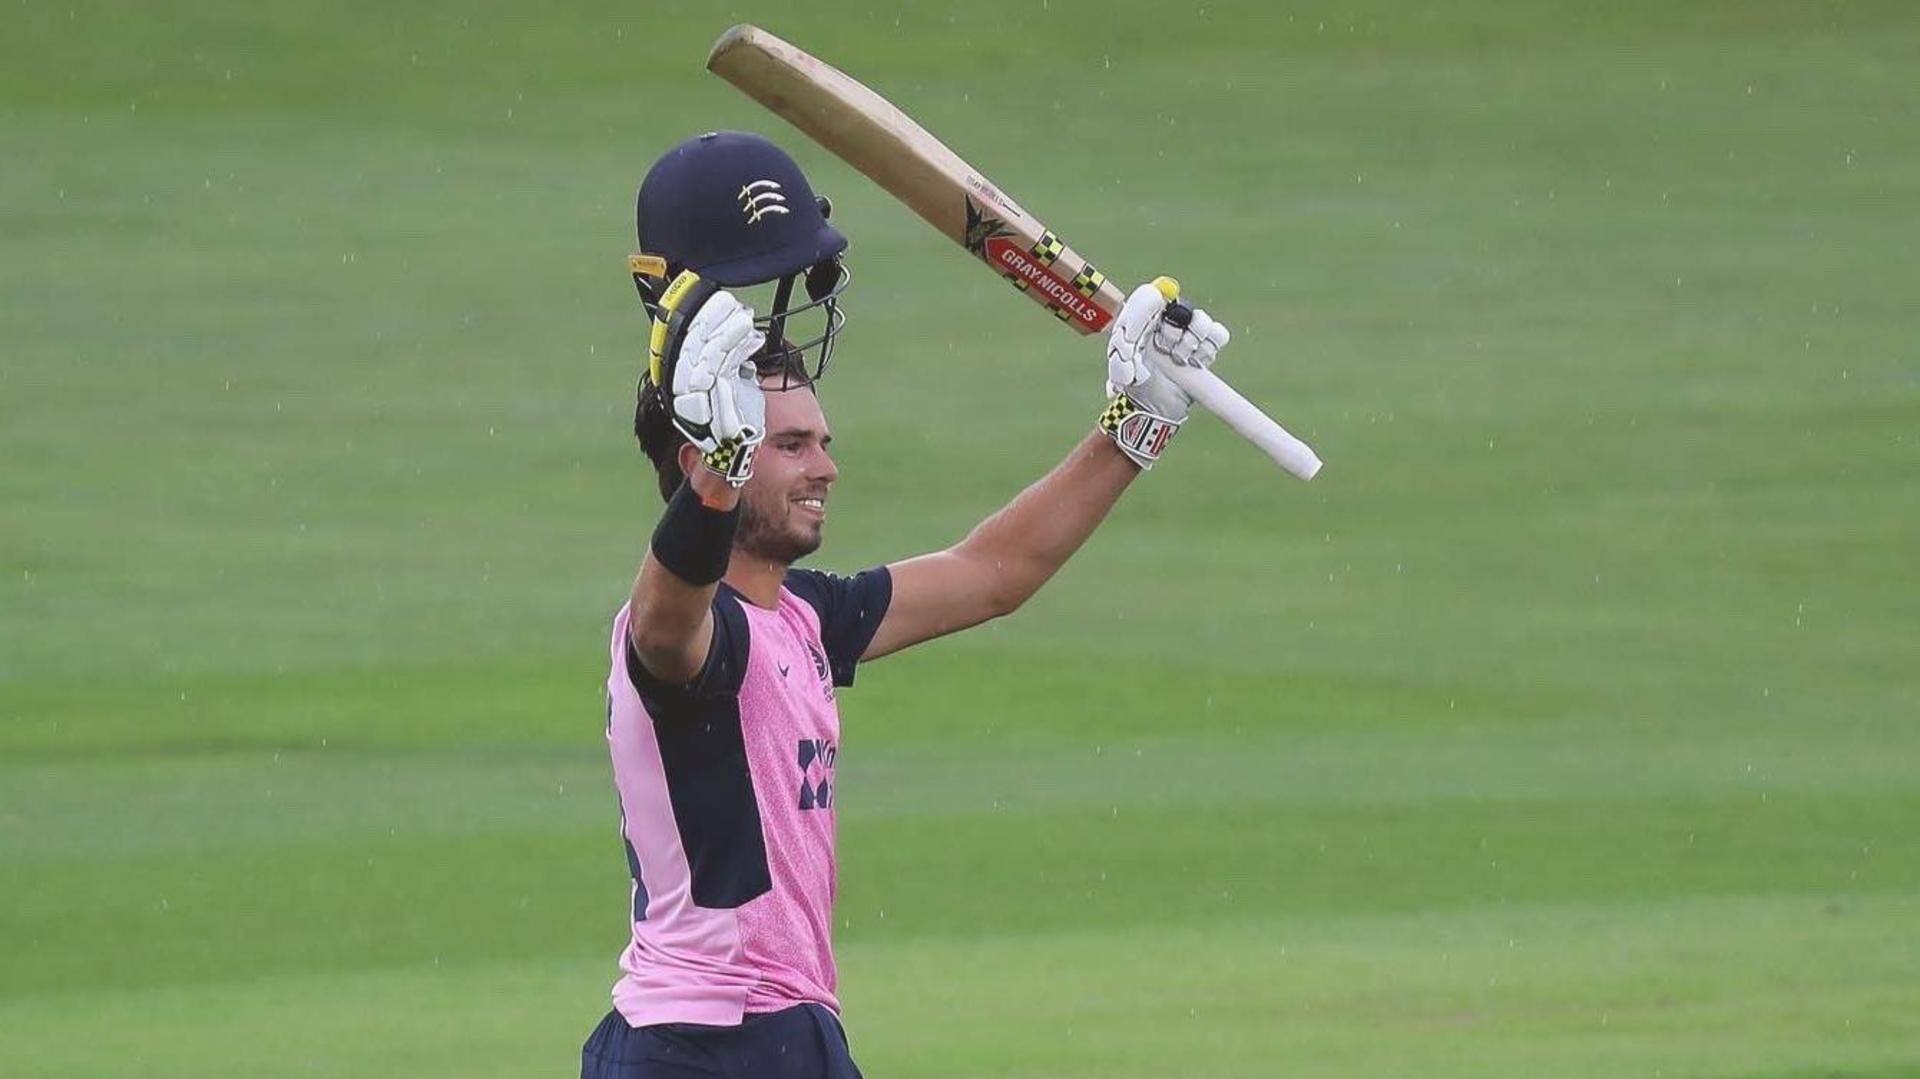 Middlesex script second-highest run-chase in T20 cricket: Key stats